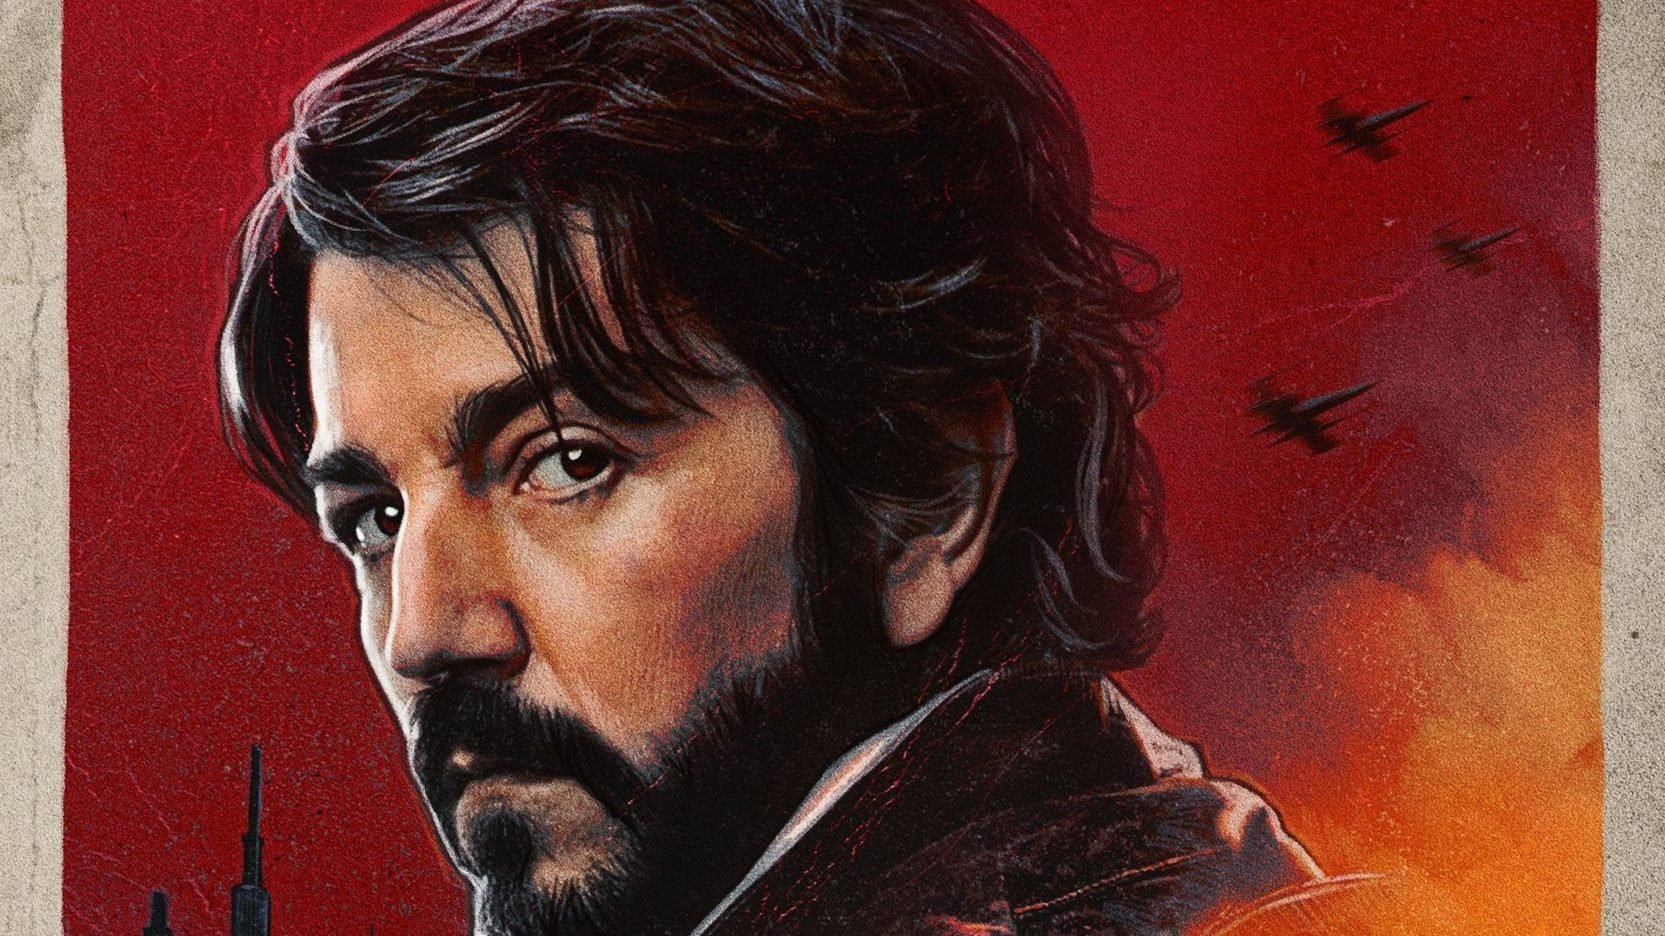 Star Wars Stuff on X: #Andor character posters!  /  X